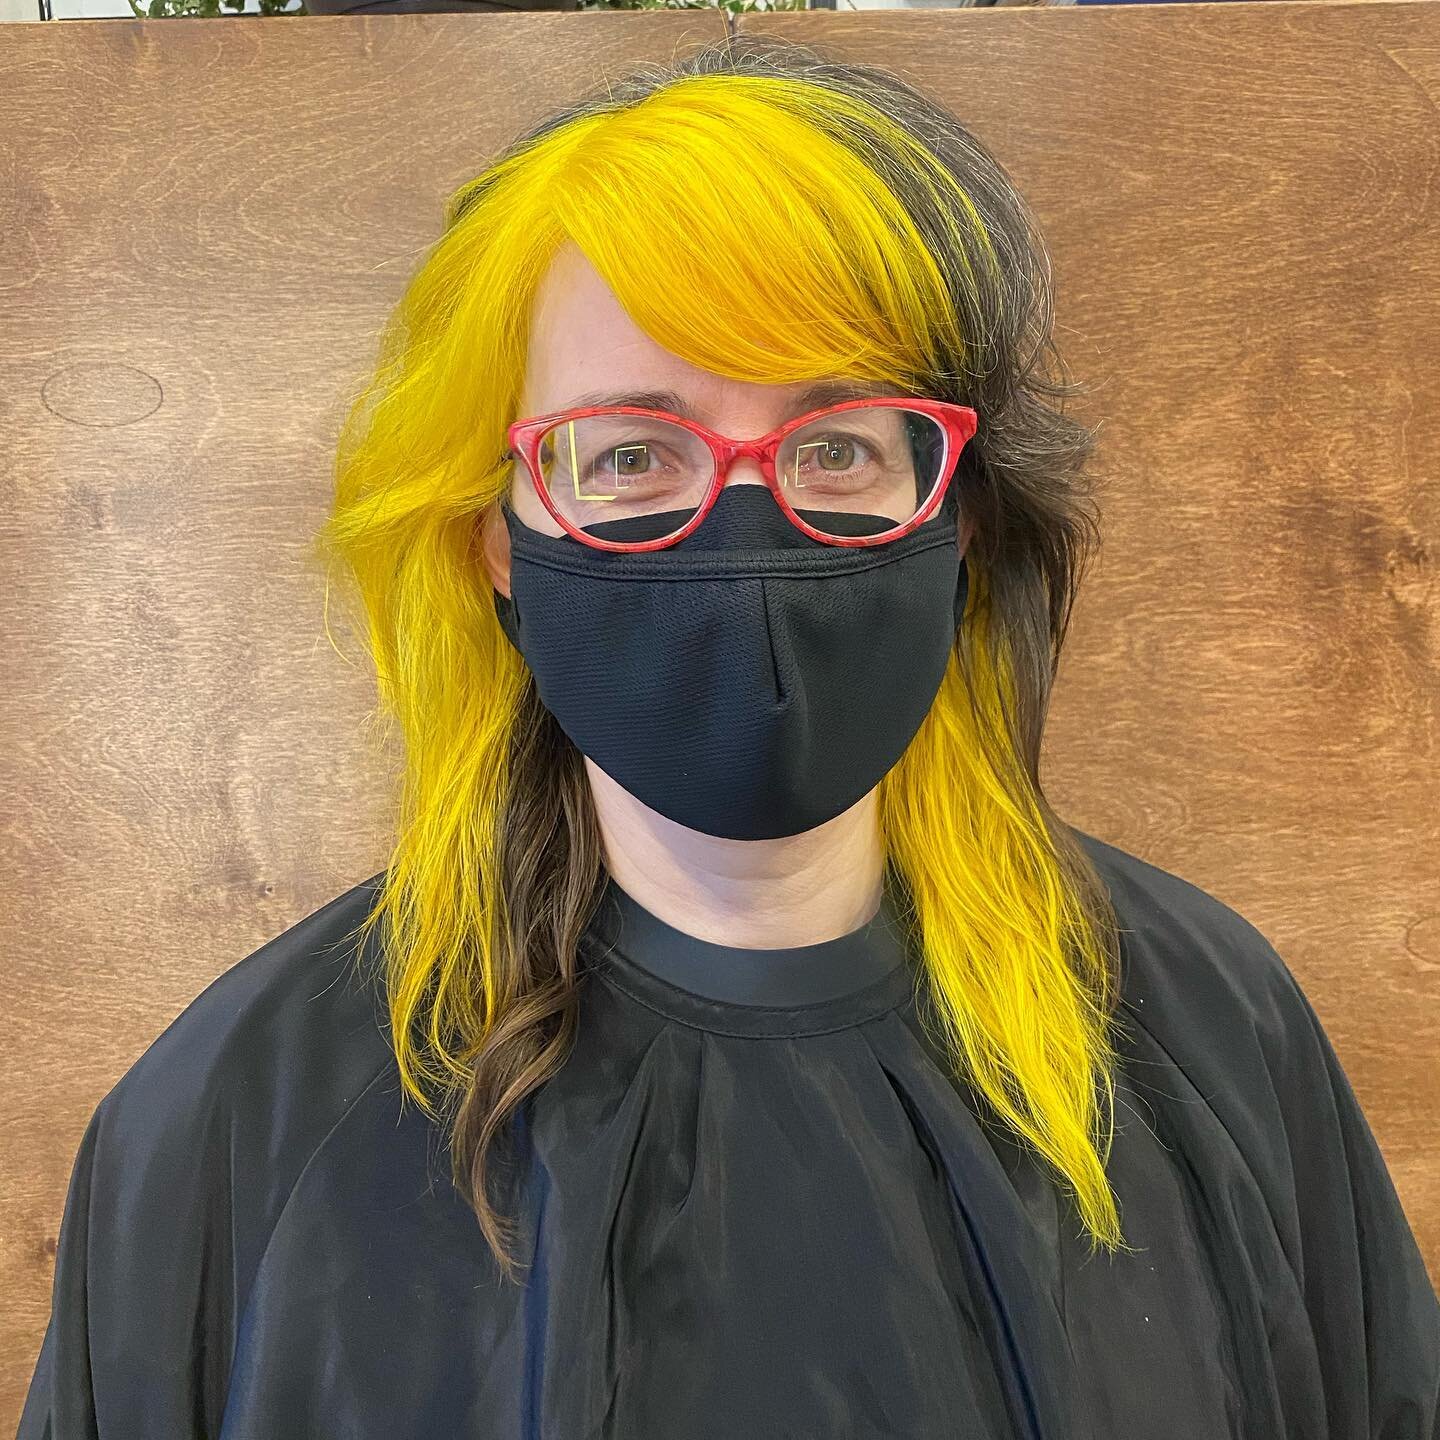 Two-toned hair color created by @tiffanyshuck
.
#haresalon #seattlehairsalon #yellowhaor #pravanavivids #twotonedhair #haircolor #haircut #seattle #hairtrends #hairstyles